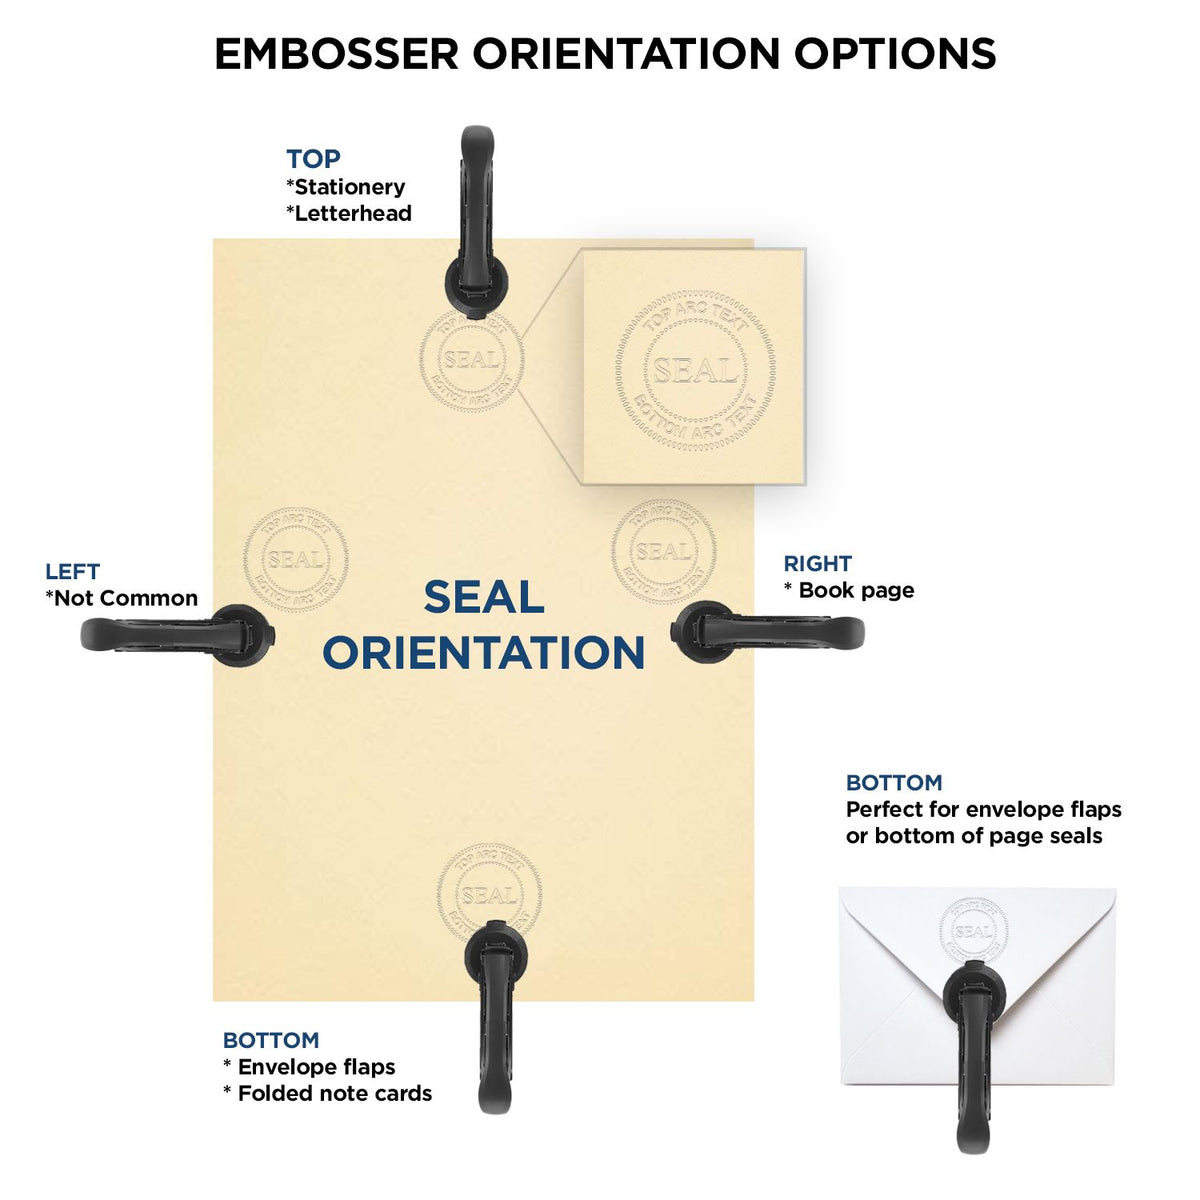 An infographic for the Handheld Louisiana Land Surveyor Seal showing embosser orientation, this is showing examples of a top, bottom, right and left insert.